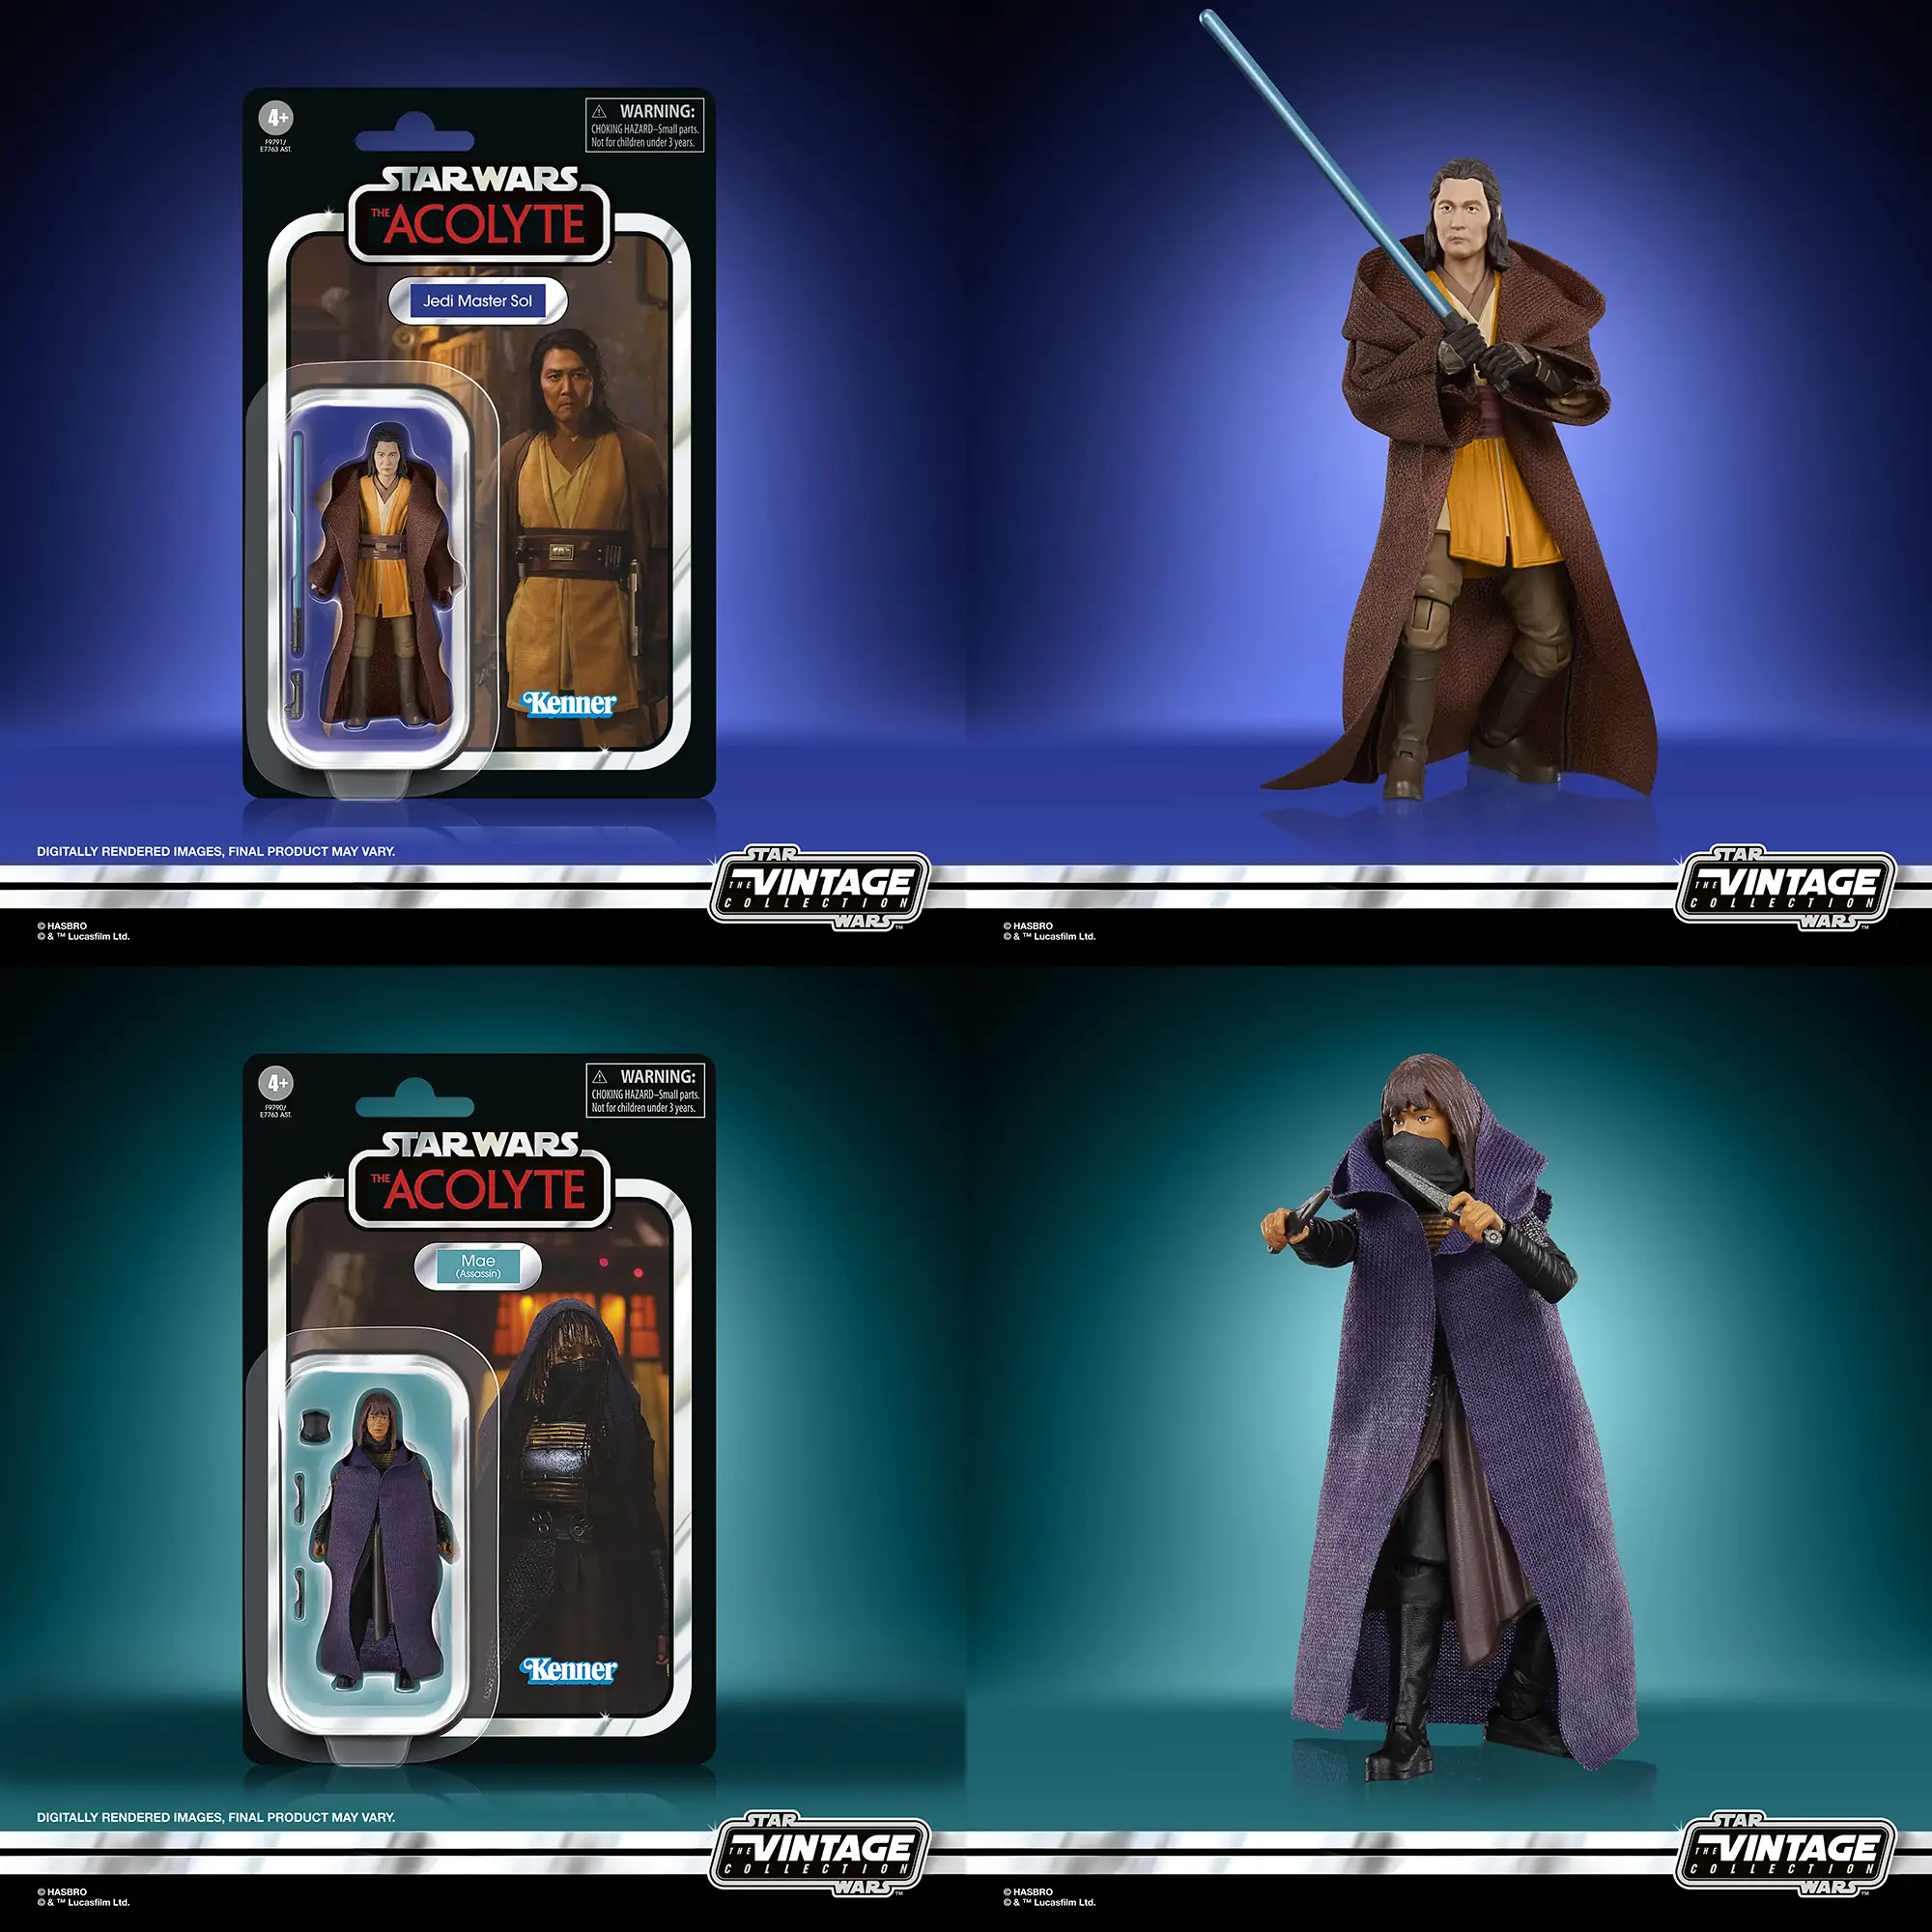 The Vintage Collection Acolyte Figures